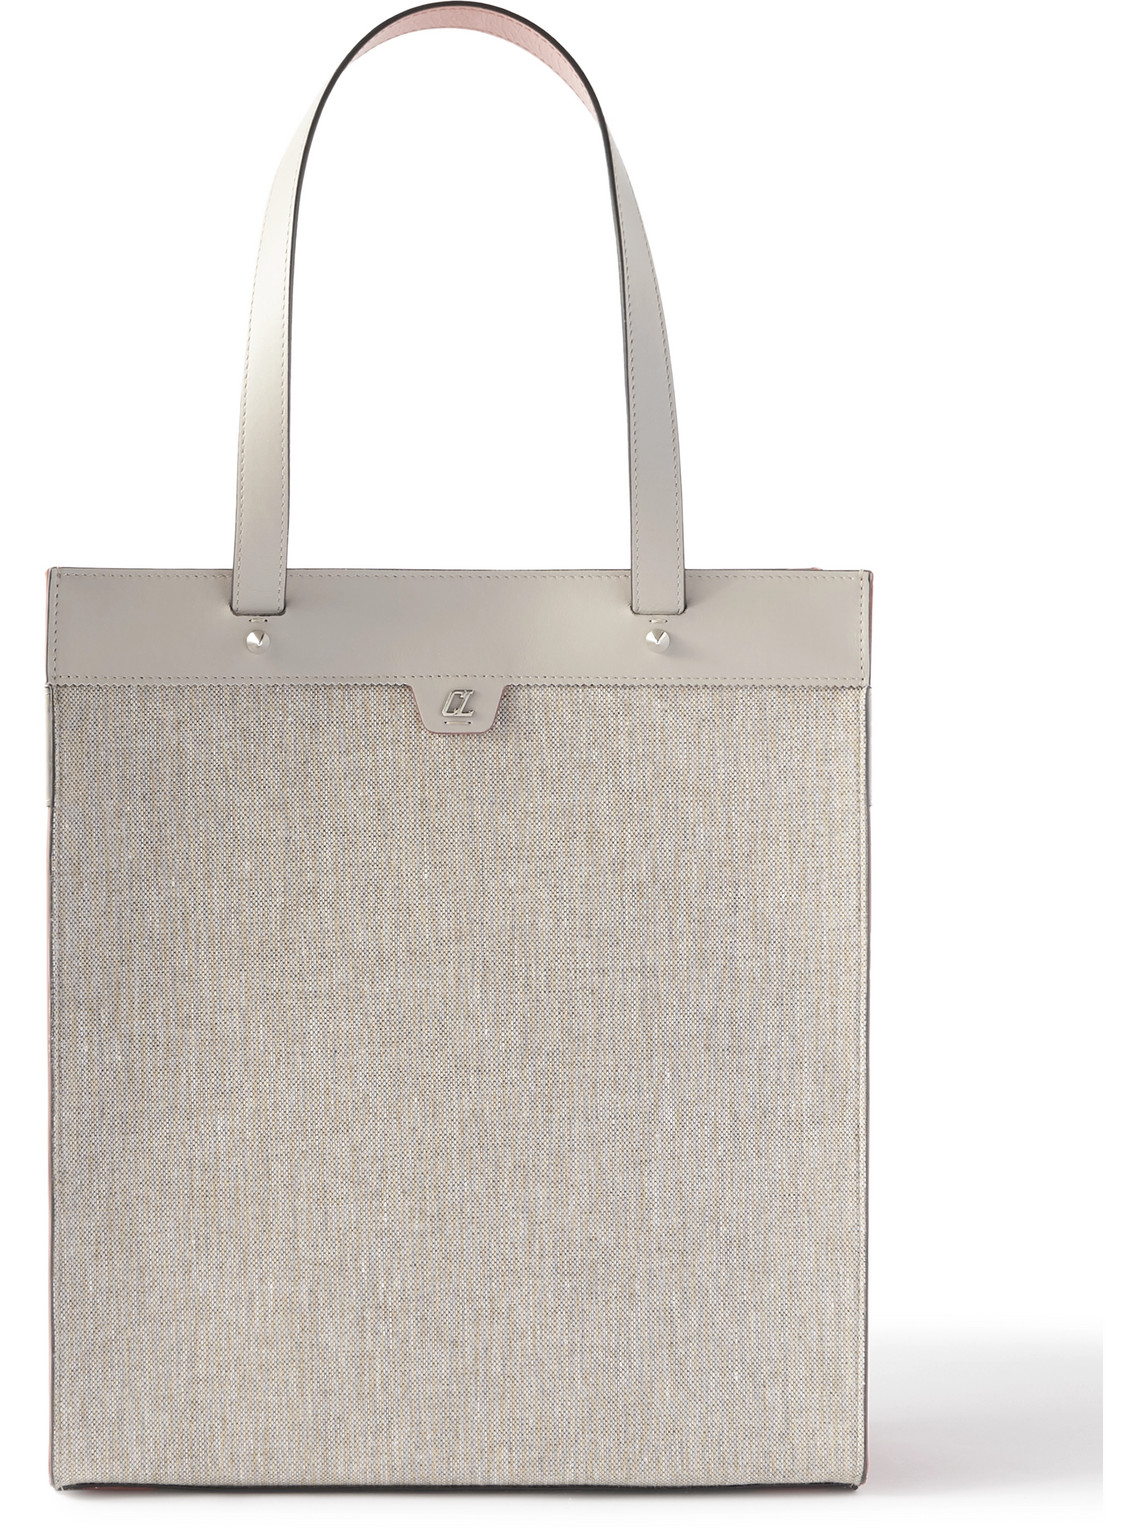 Christian Louboutin Logo-embossed Canvas And Leather Tote Bag In Goose/goose/goose